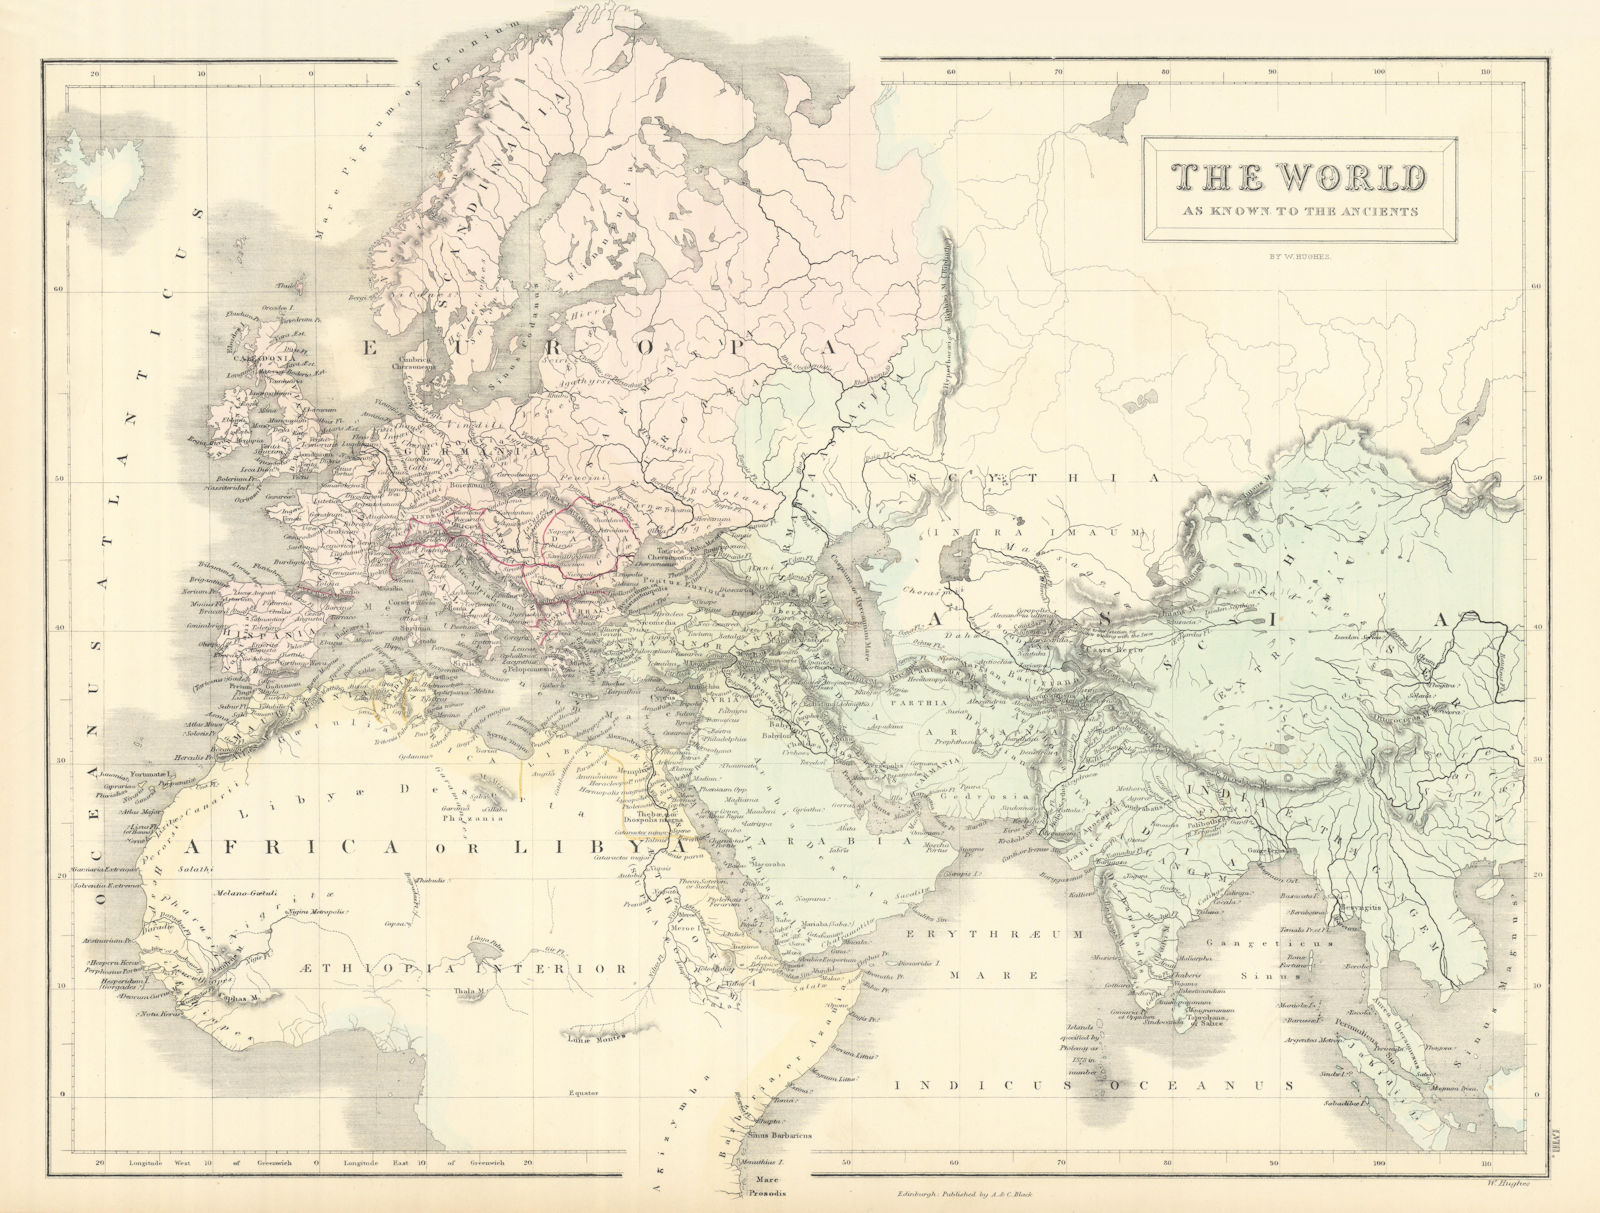 The World as known to the Ancients, by WILLIAM HUGHES 1854 old antique map